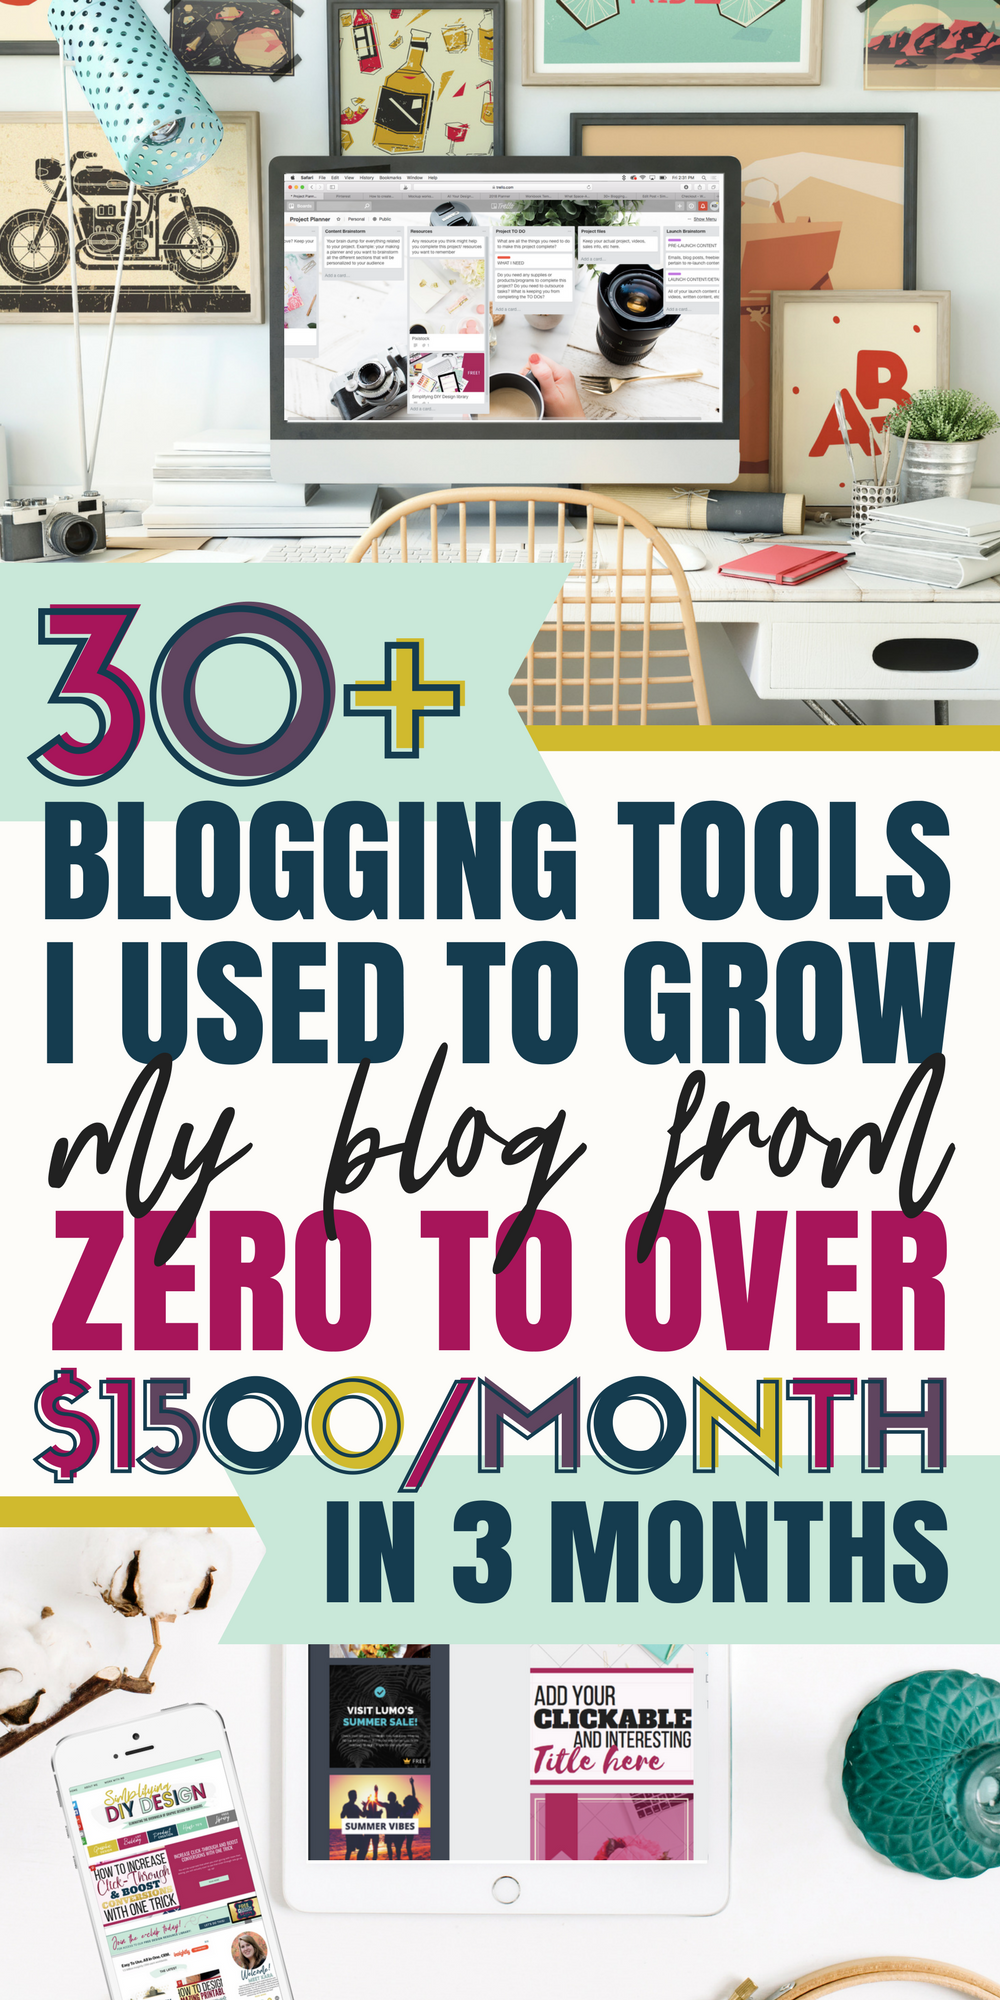 Want to start a blog in 2023? Here are the best blogging tools for beginners that we'd recommend (and even used ourselves!) to grow into a six-figure blog!